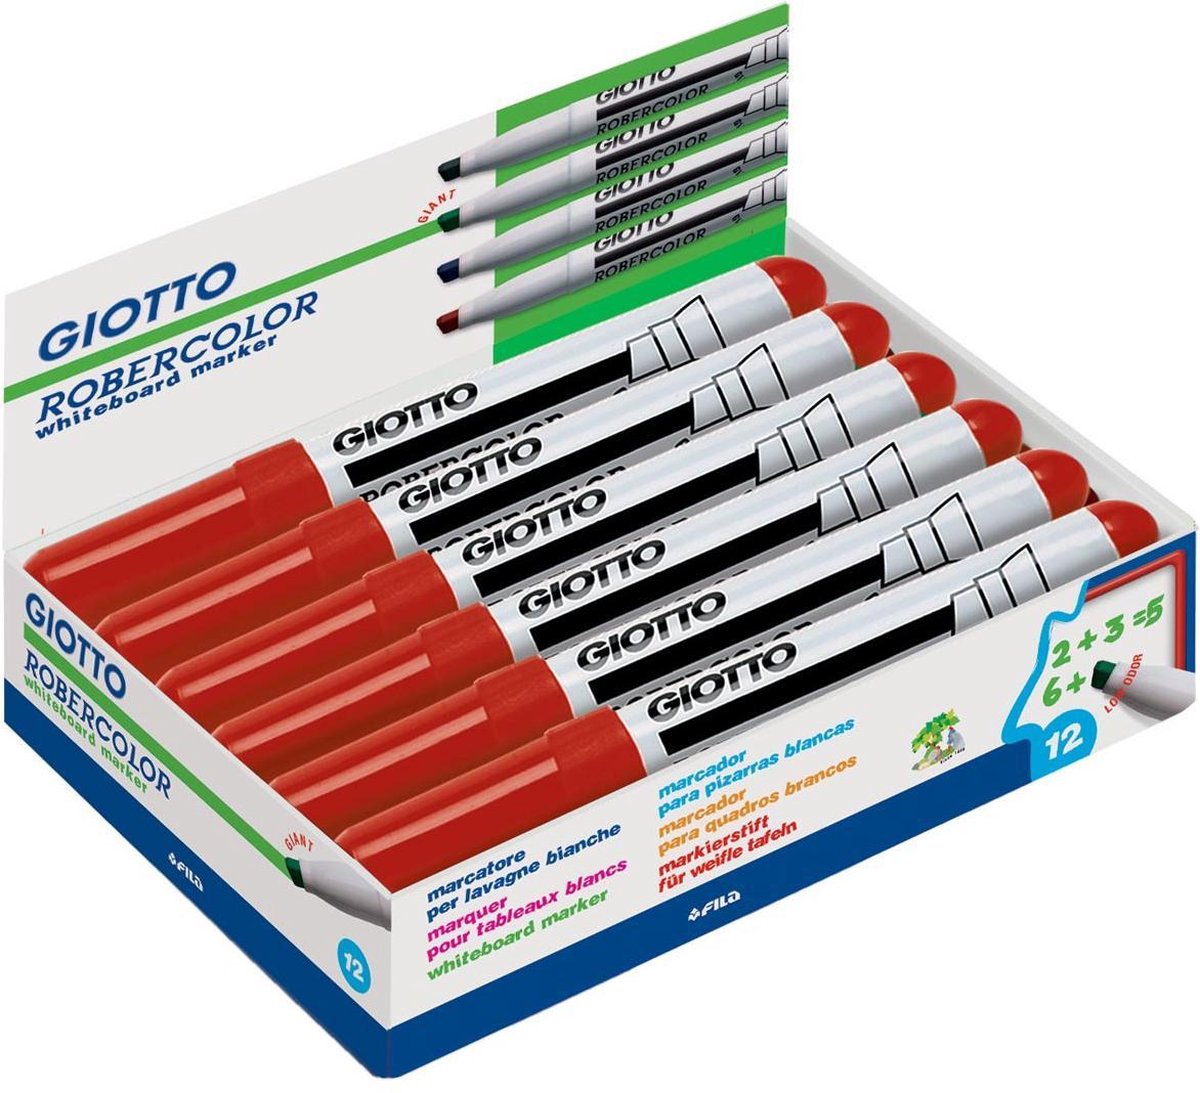 46x Giotto Robercolor whiteboardmarker maxi, schuine punt, rood